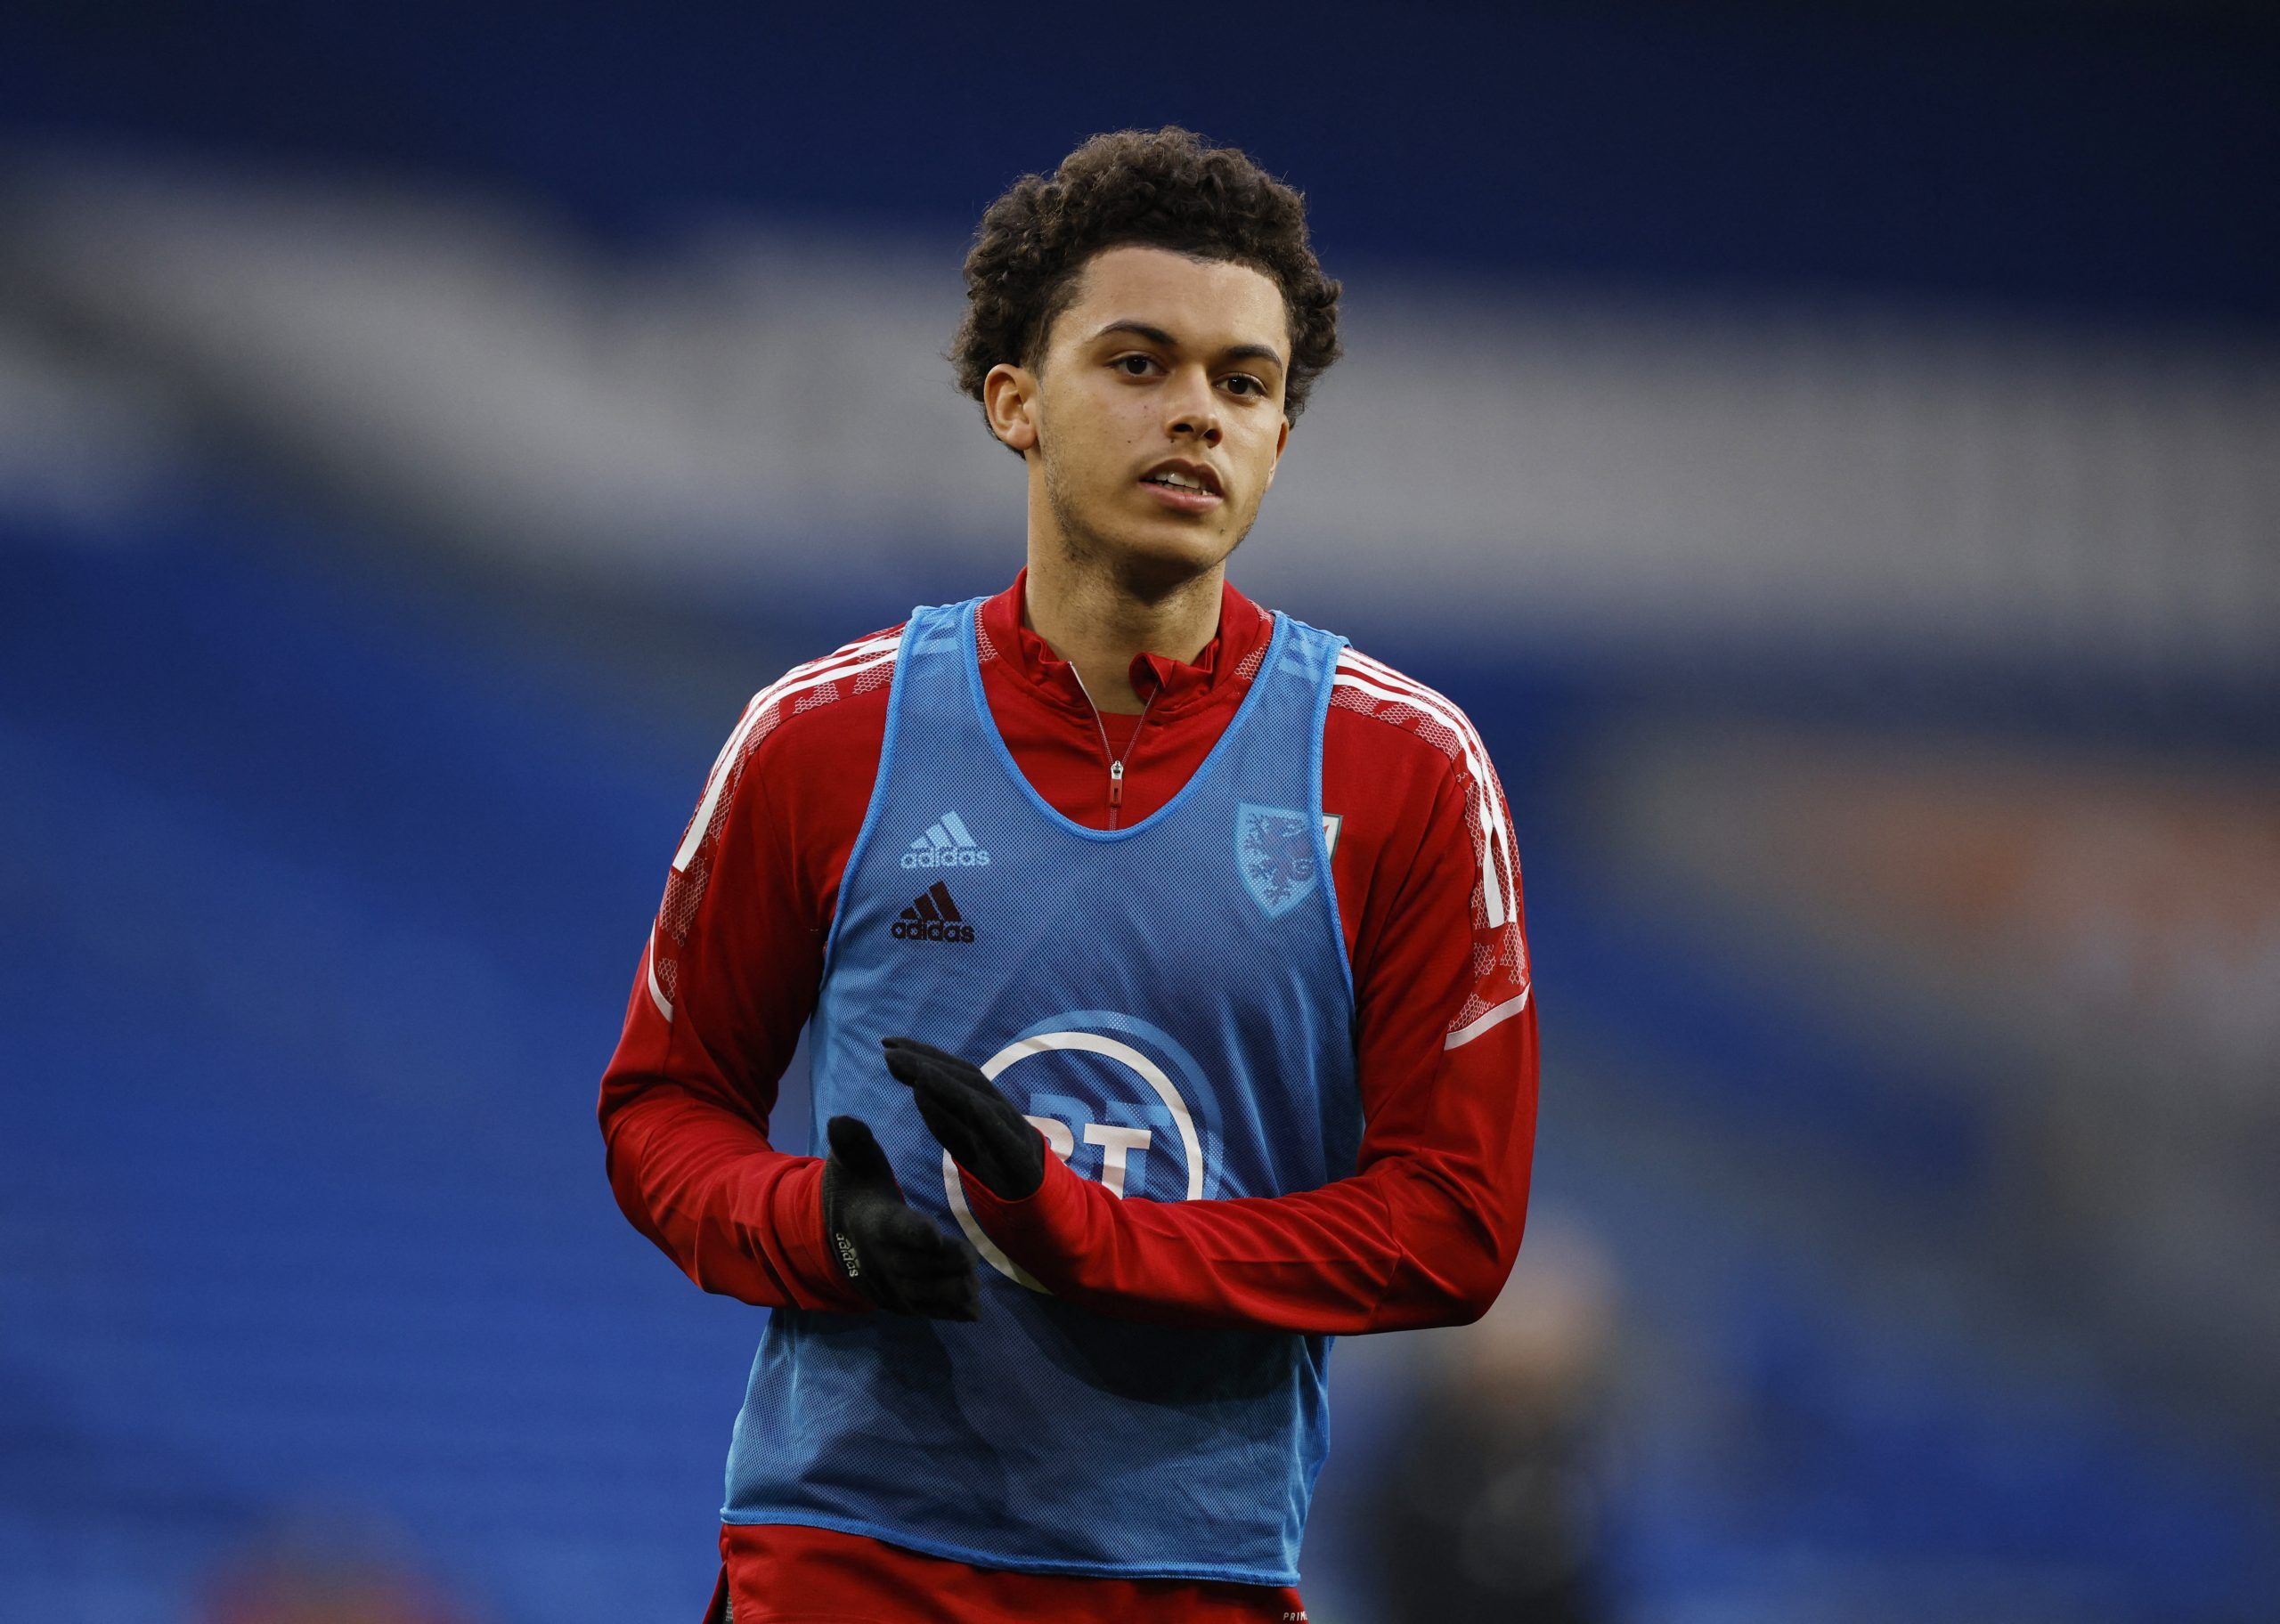 Soccer Football - International Friendly - Wales v Czech Republic - Cardiff City Stadium, Cardiff, Wales, Britain - March 29, 2022 Wales' Brennan Johnson during the warm up before the match Action Images via Reuters/John Sibley